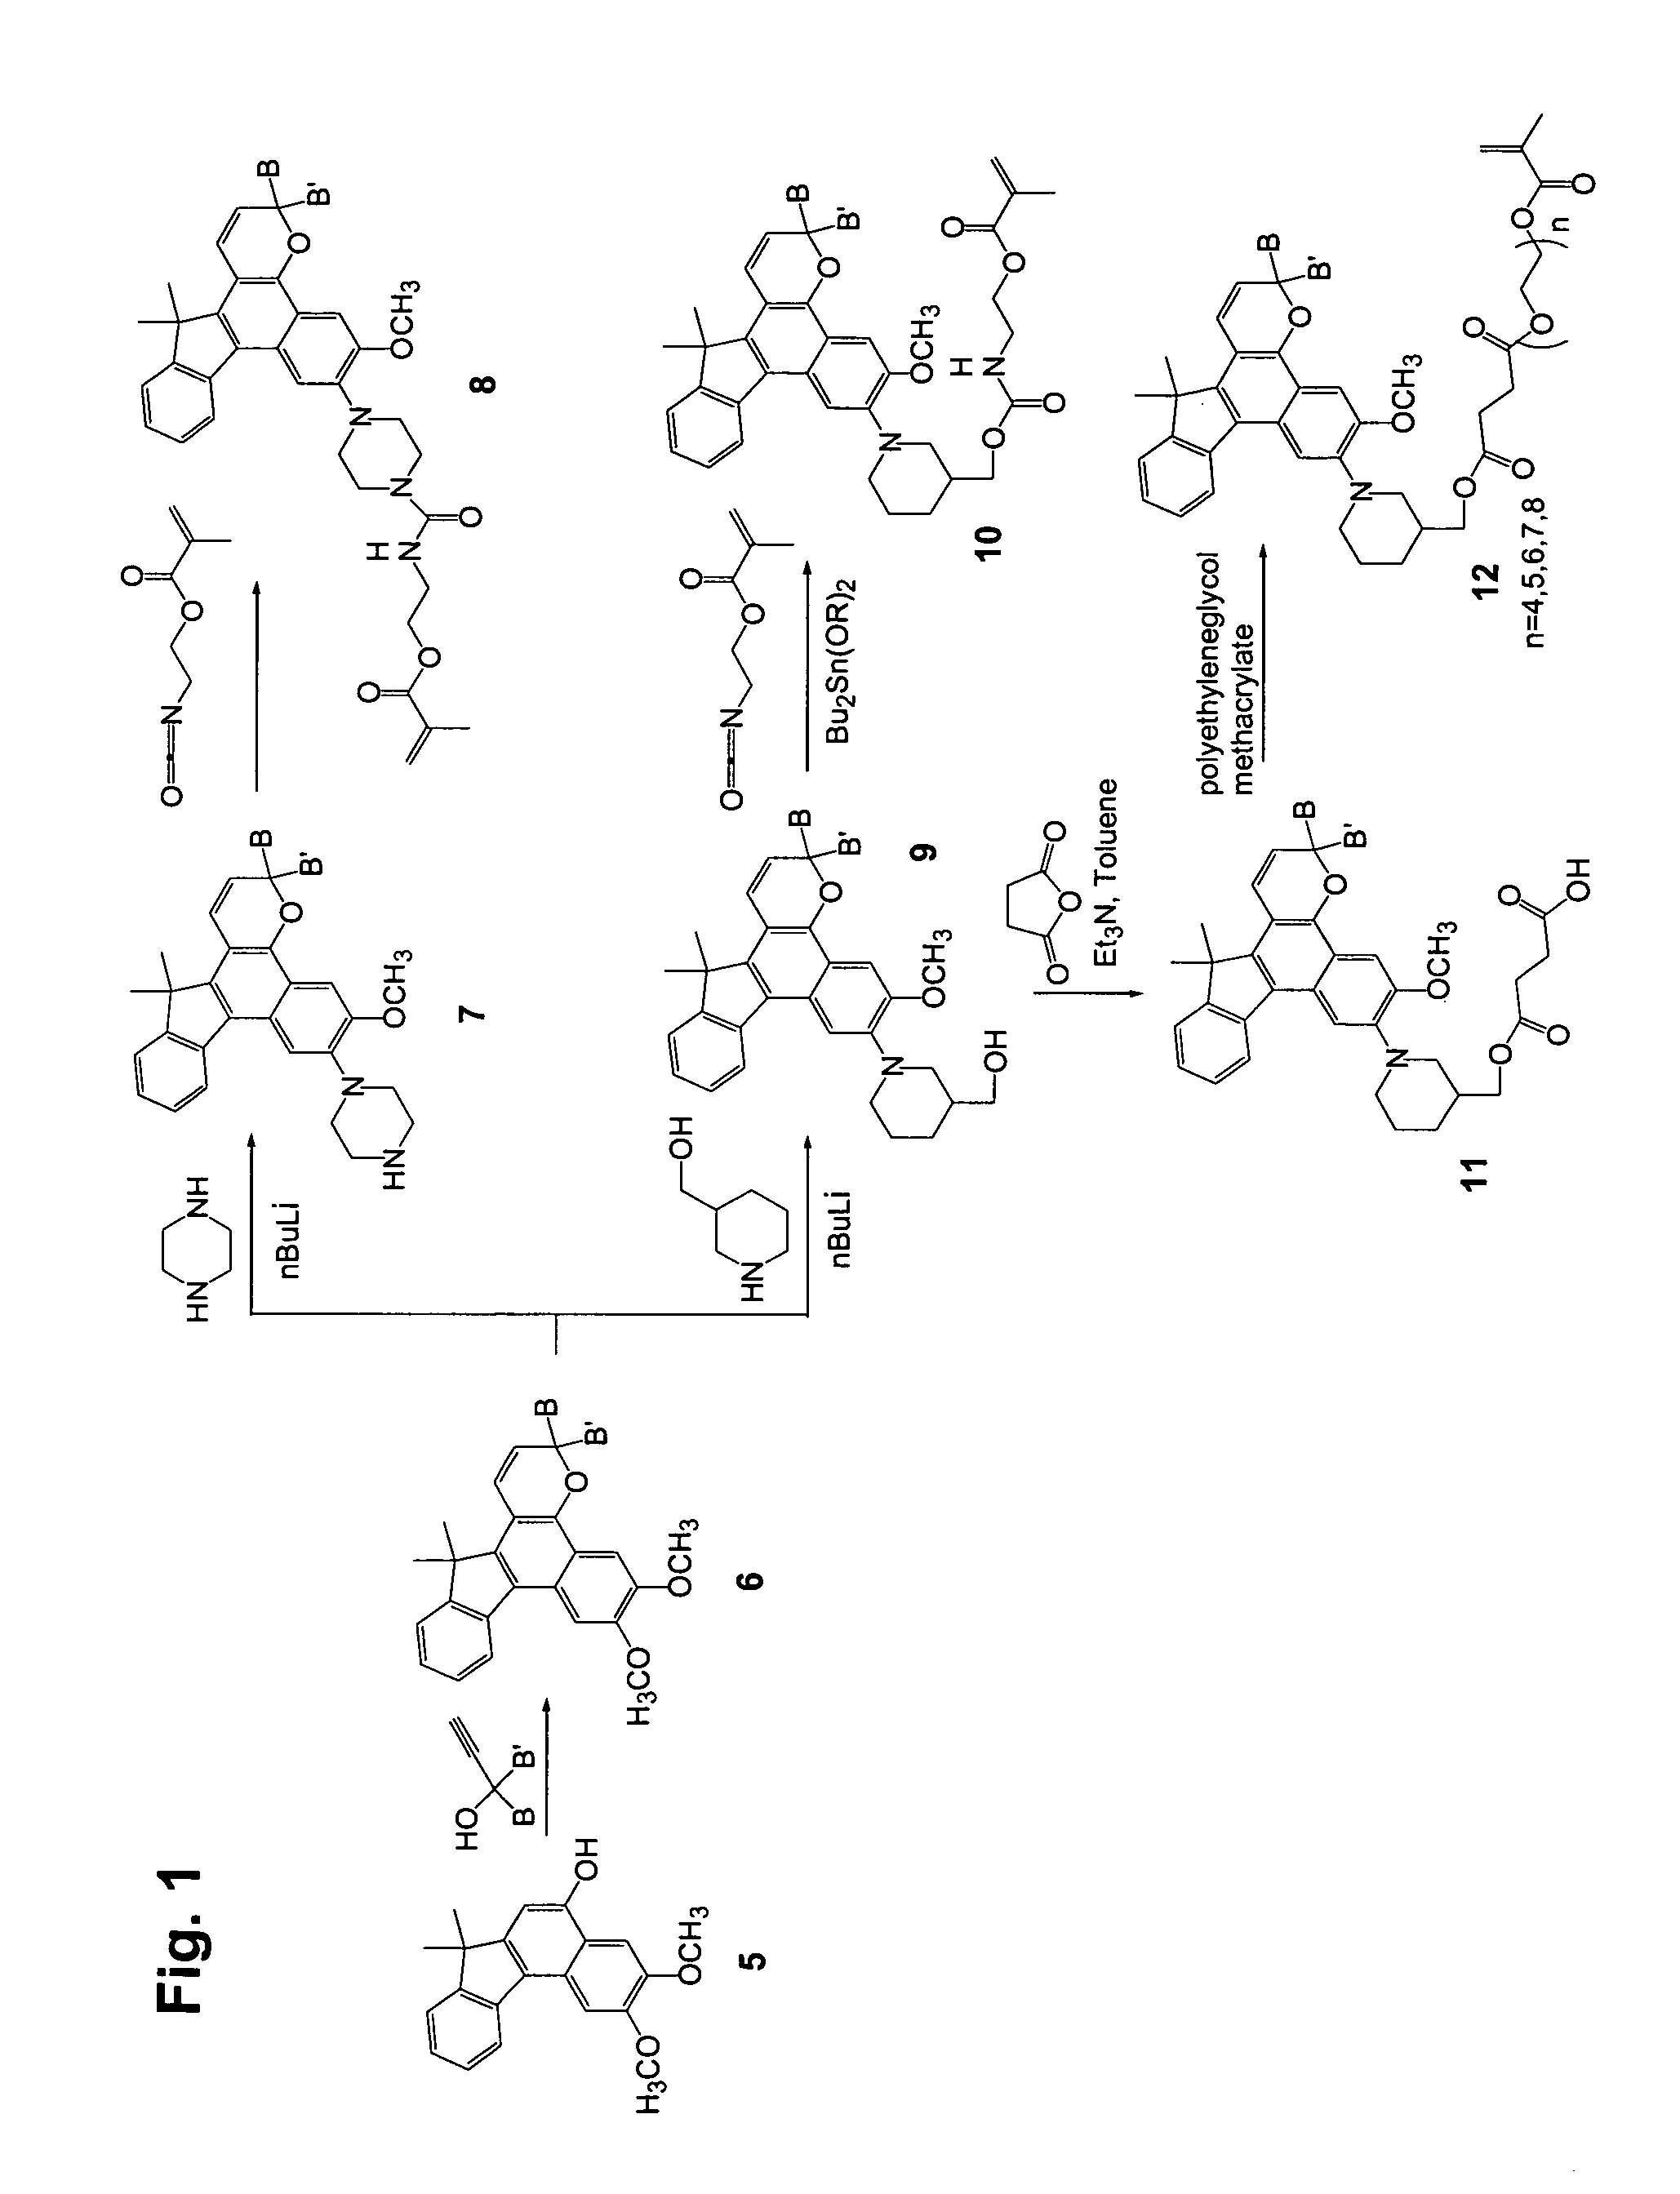 Photochromic materials with reactive substituents